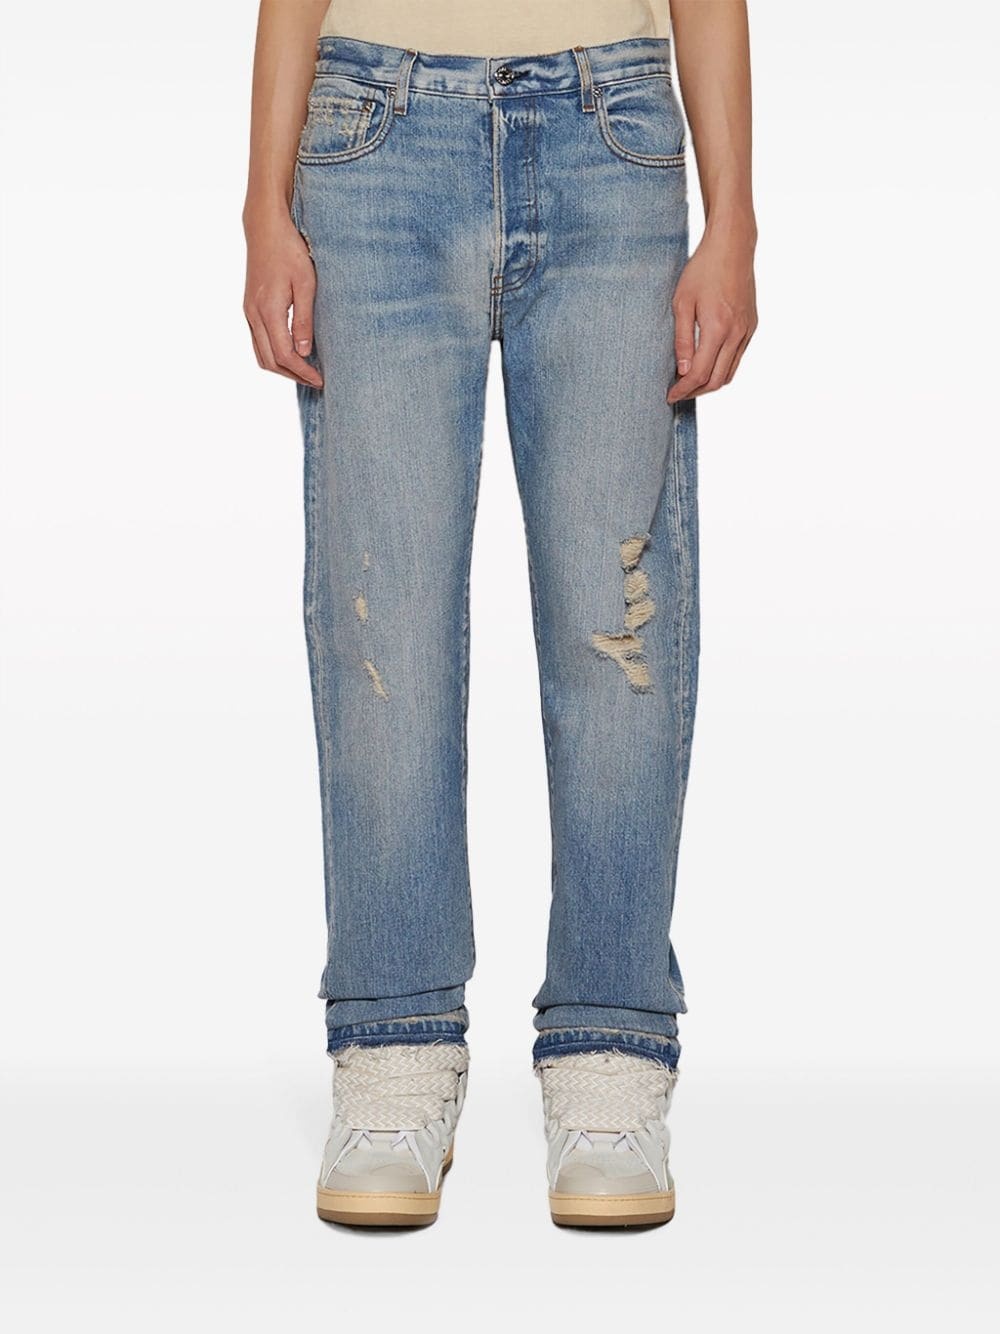 South Pointe 5001 jeans - 3